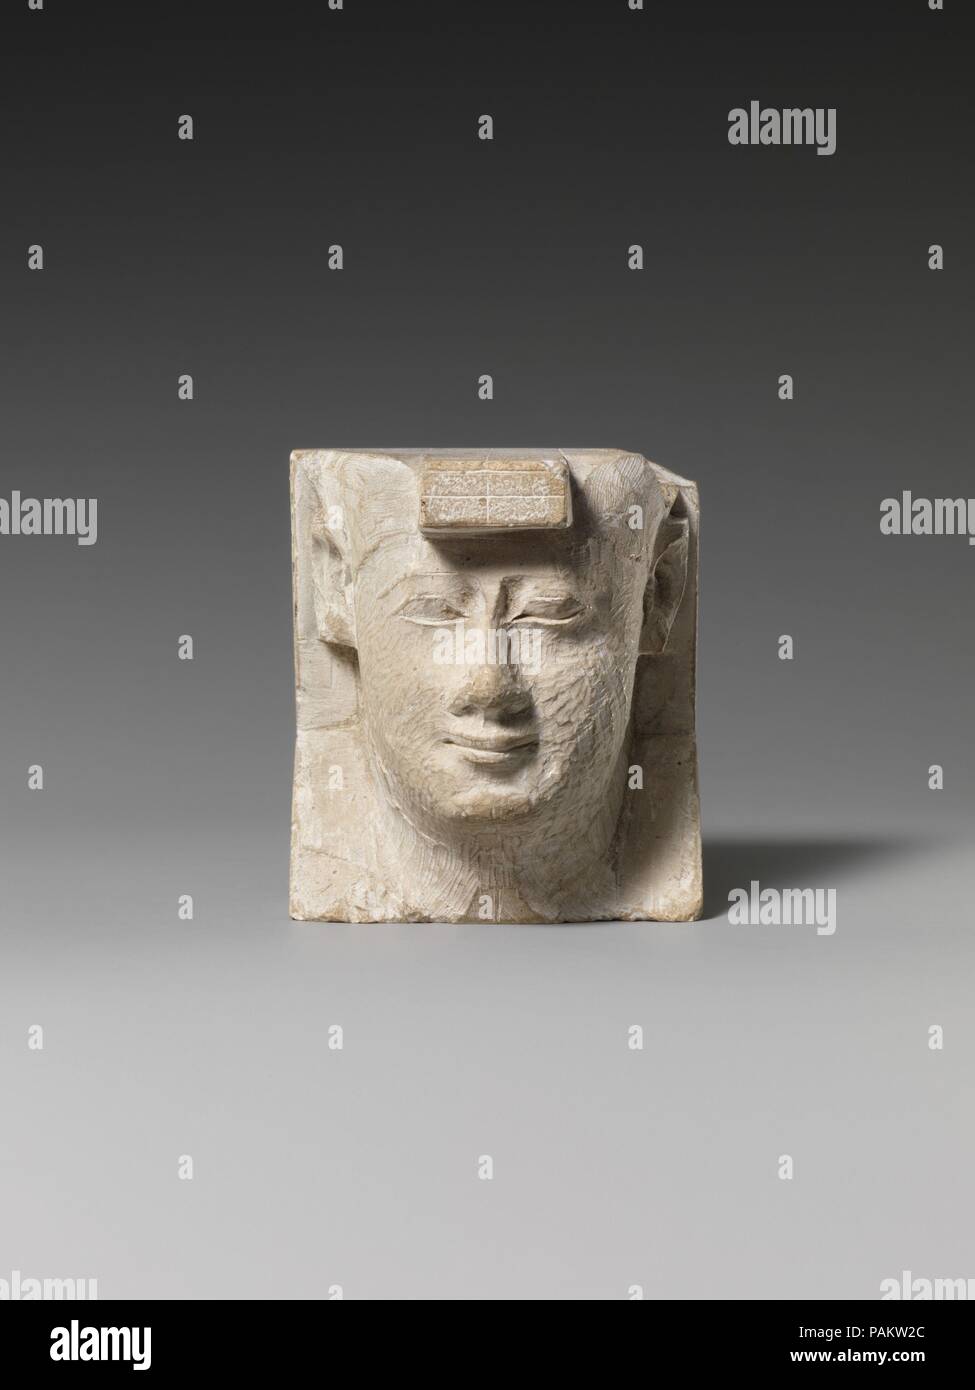 Royal bust. Dimensions: H. 6.5 cm (2 9/16 in.); W. 5.8 cm (2 5/16 in.); D. 4.8 cm (1 7/8 in.). Date: 400-200 B.C..  Small Late Period and Ptolemaic reliefs or sculptures that depict a subject in a partial or unfinished way but are themselves finished objects constitute a special class of object. Guidelines like those for artists are often prominently exhibited as part of the object, although, in fact, many instances can be noted where the object simply could not serve as a suitable model for a traditional formal Egyptian representation. Personifications of kingship, figures that may represent  Stock Photo